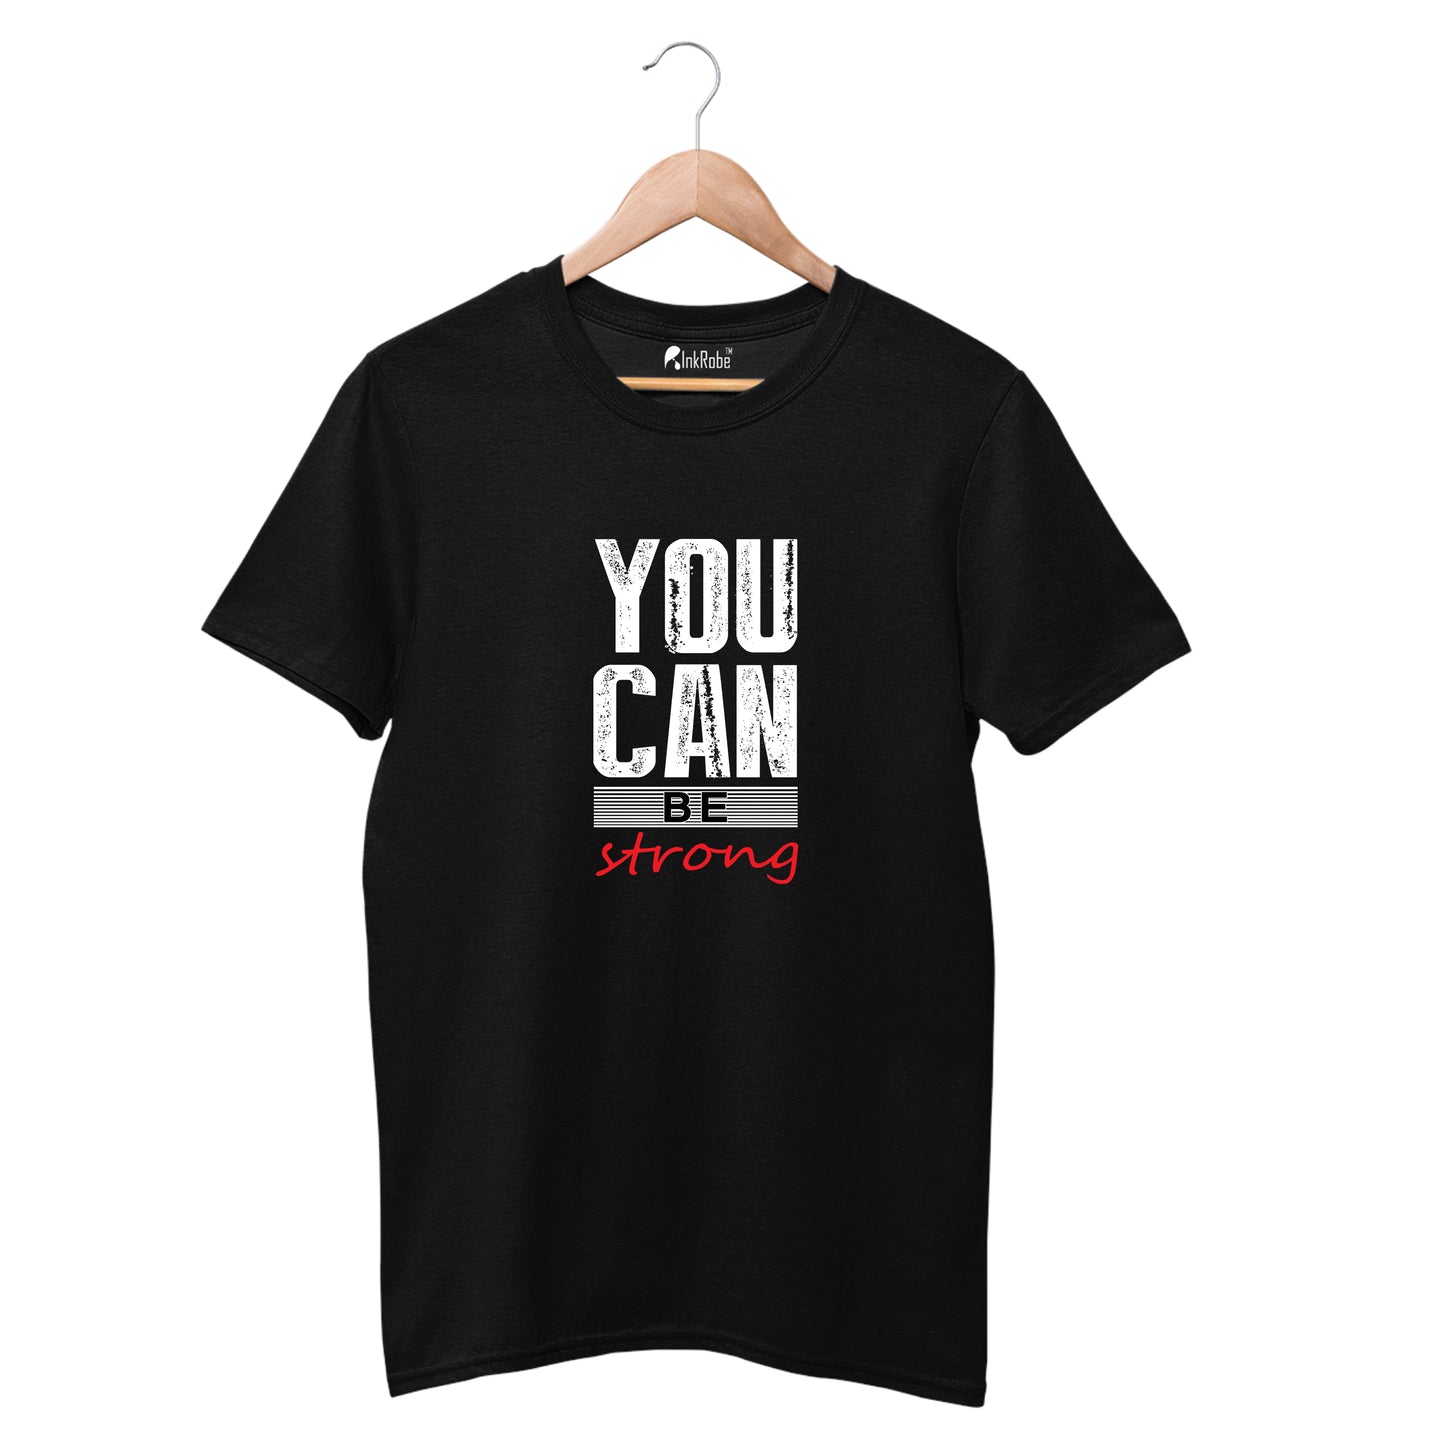 You can be strong T-shirt